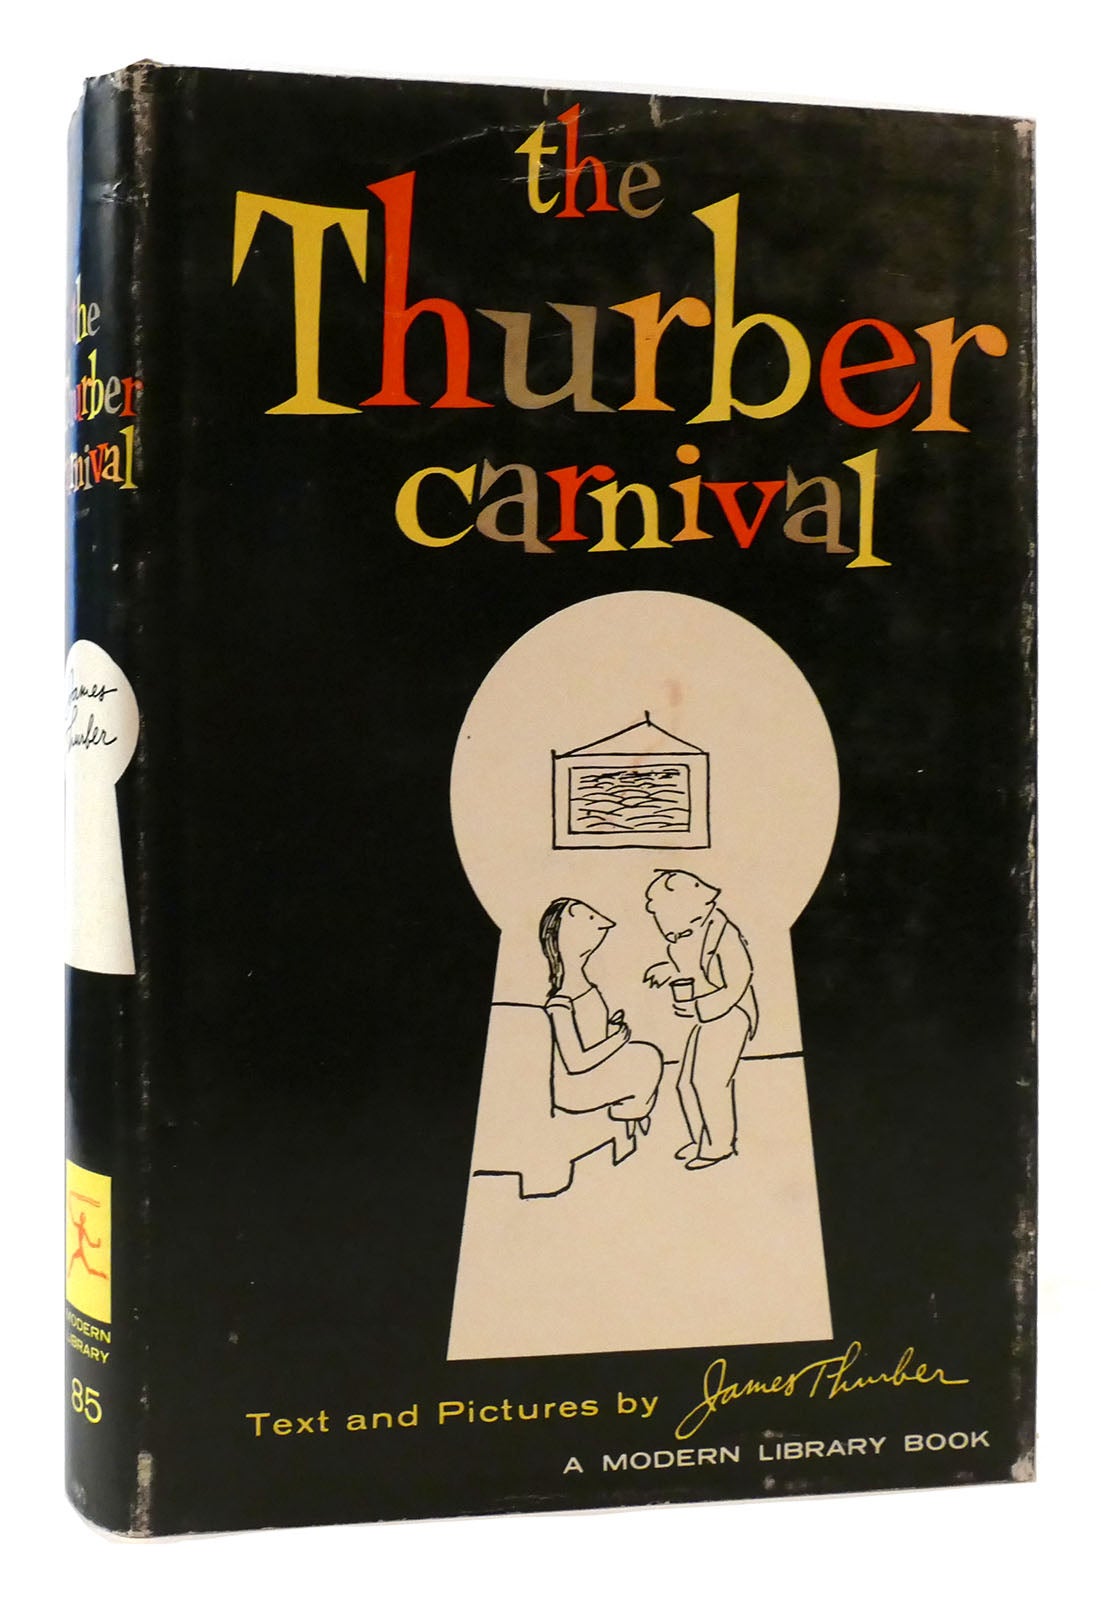 THE THURBER CARNIVAL | James Thurber | 1st Modern Library Edition ...